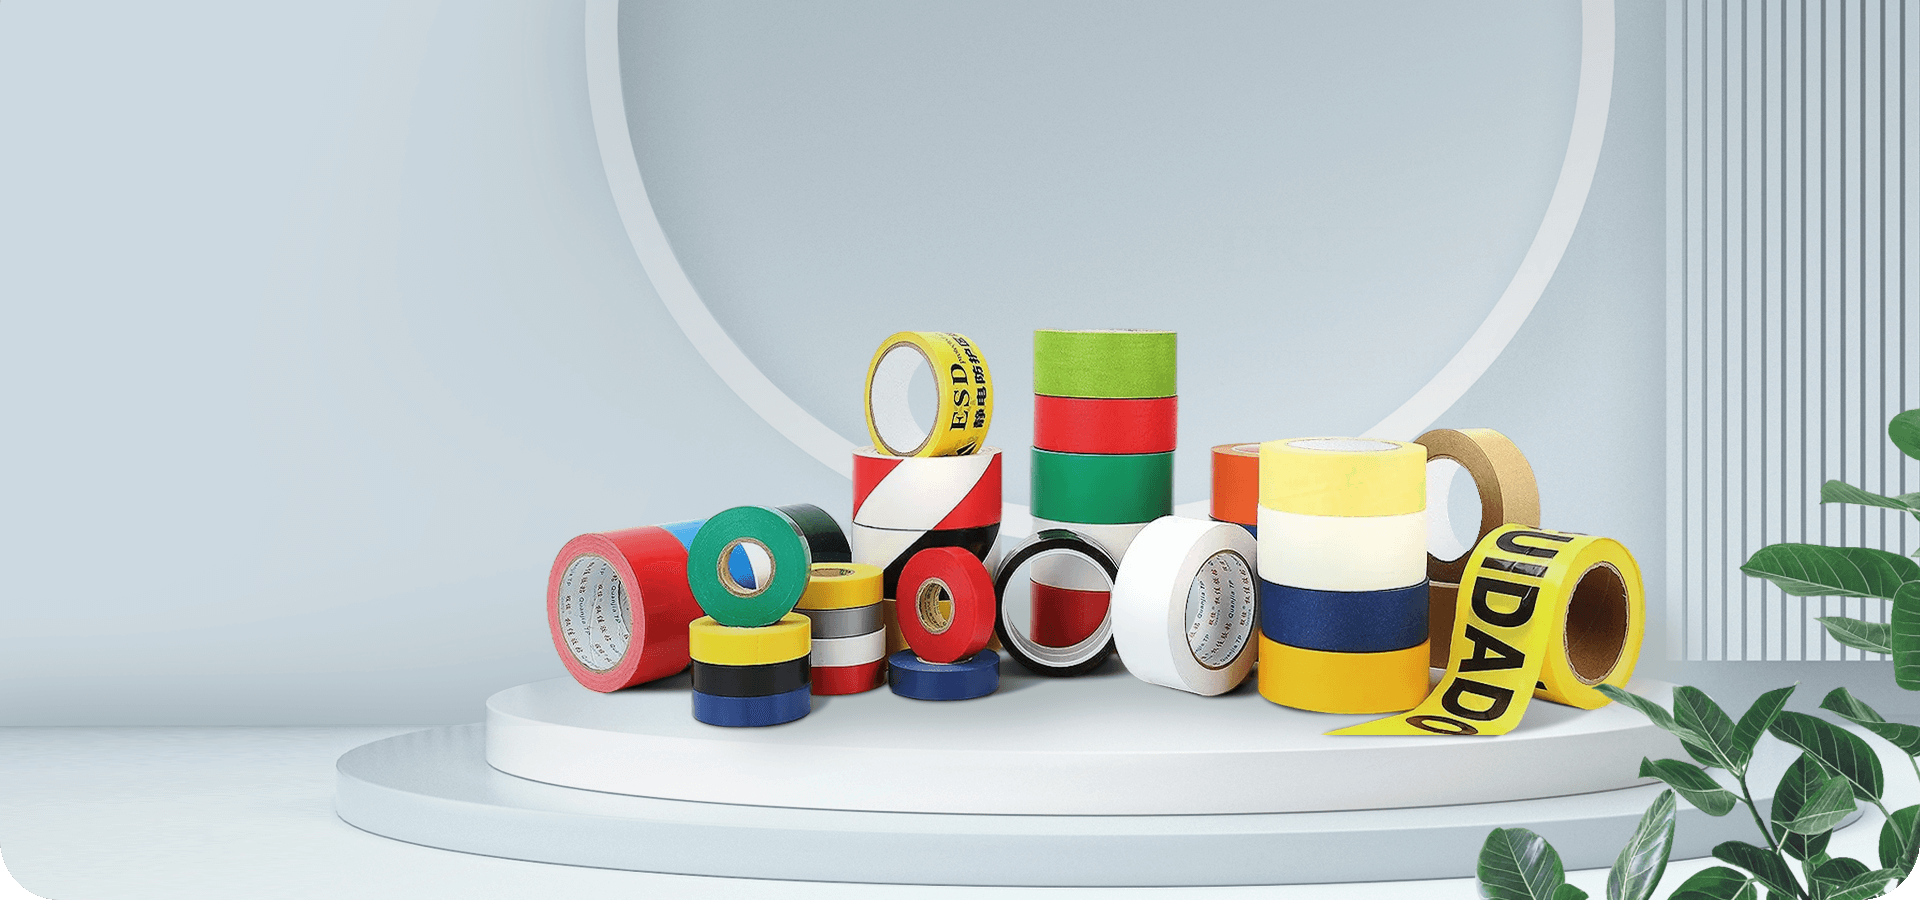 Trust in our adhesive tape to reliably secure your projects, every time